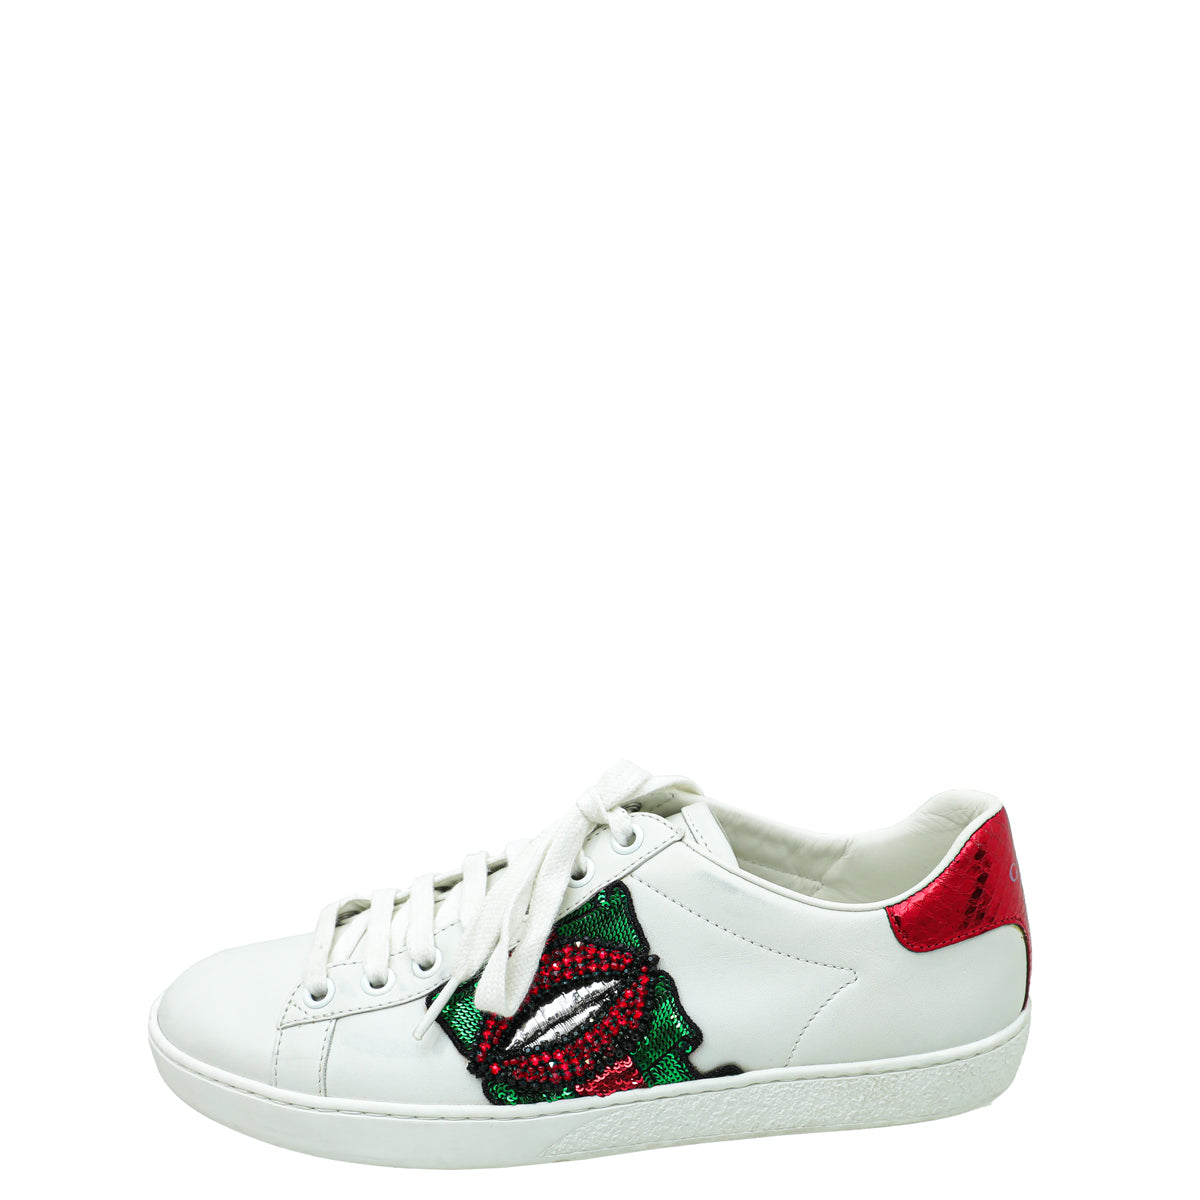 Gucci Tricolor Web Lips Sequins Embroidered Ace Sneakers 36